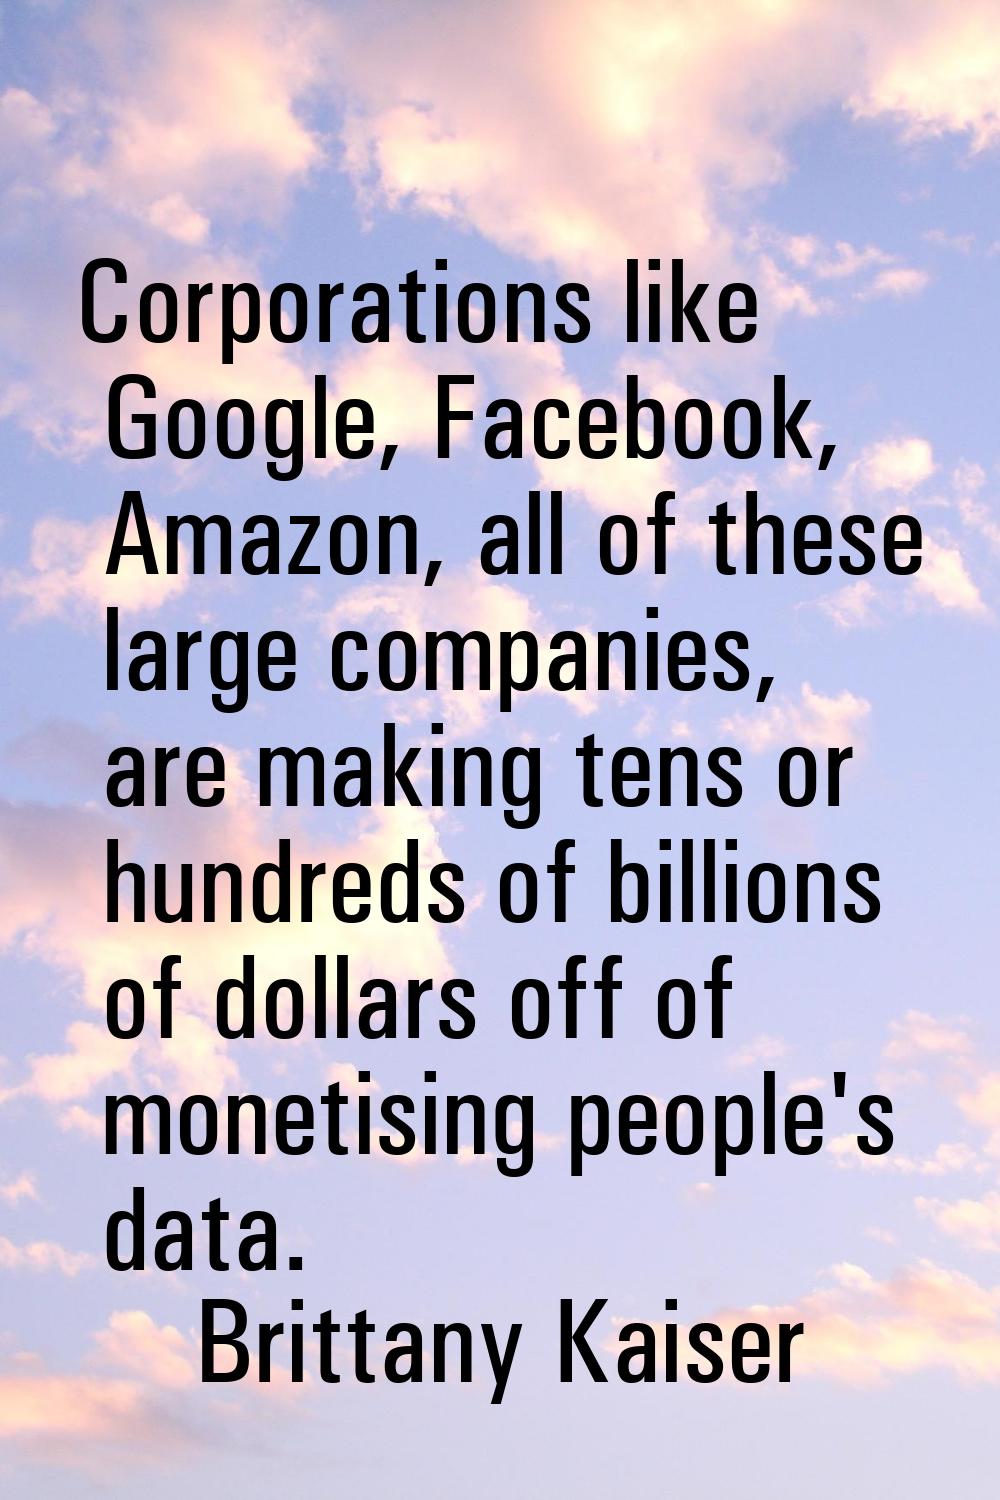 Corporations like Google, Facebook, Amazon, all of these large companies, are making tens or hundre